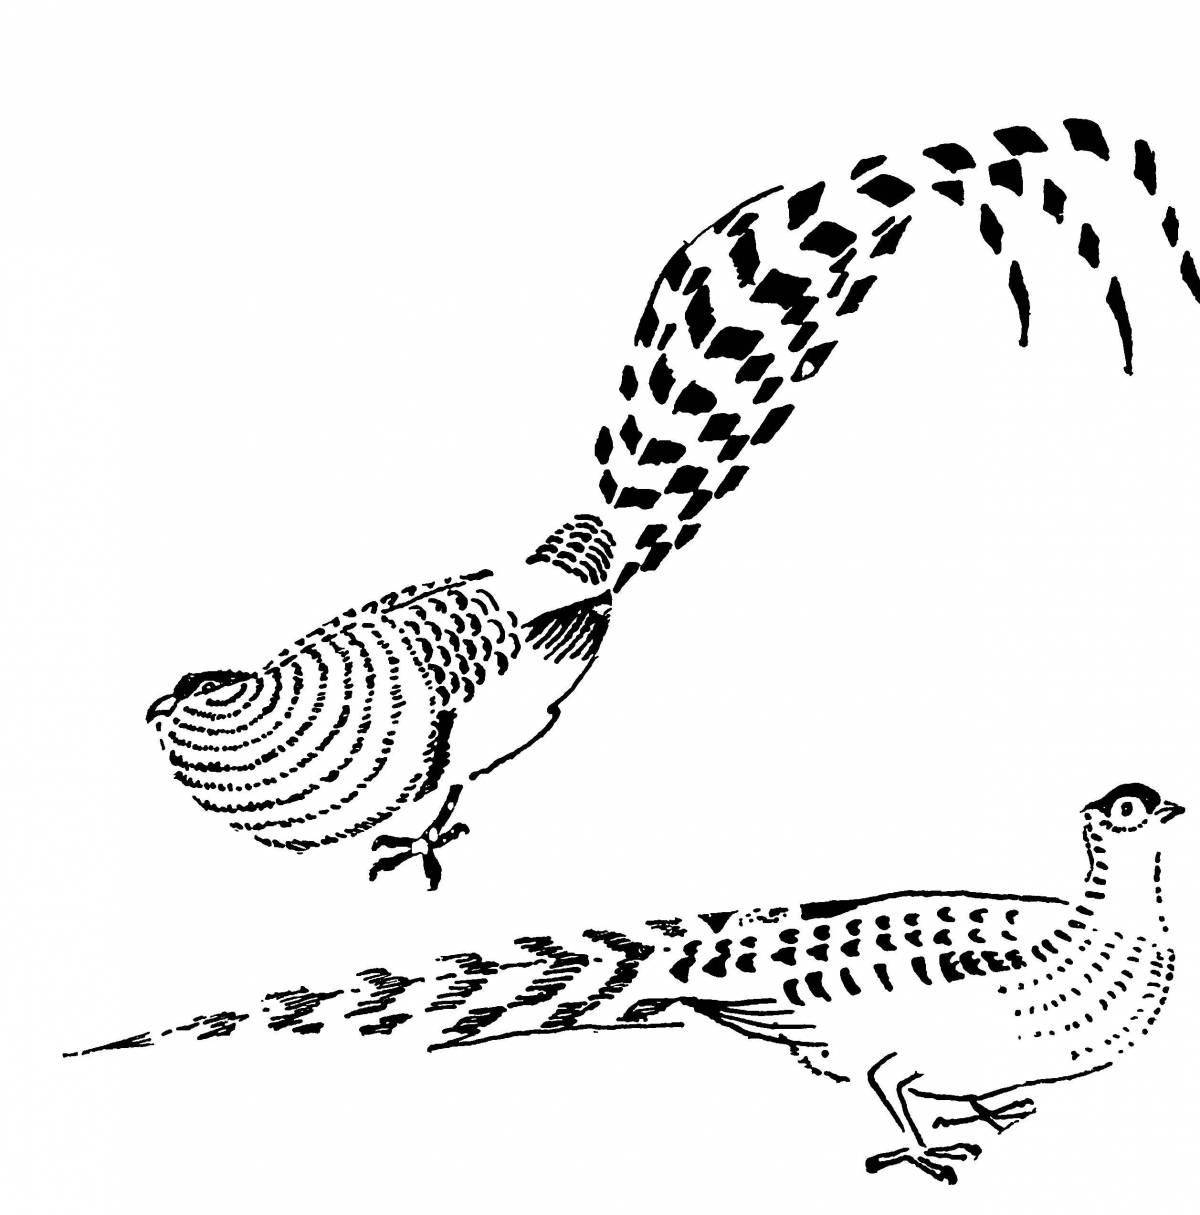 Fairy grouse coloring page for kids